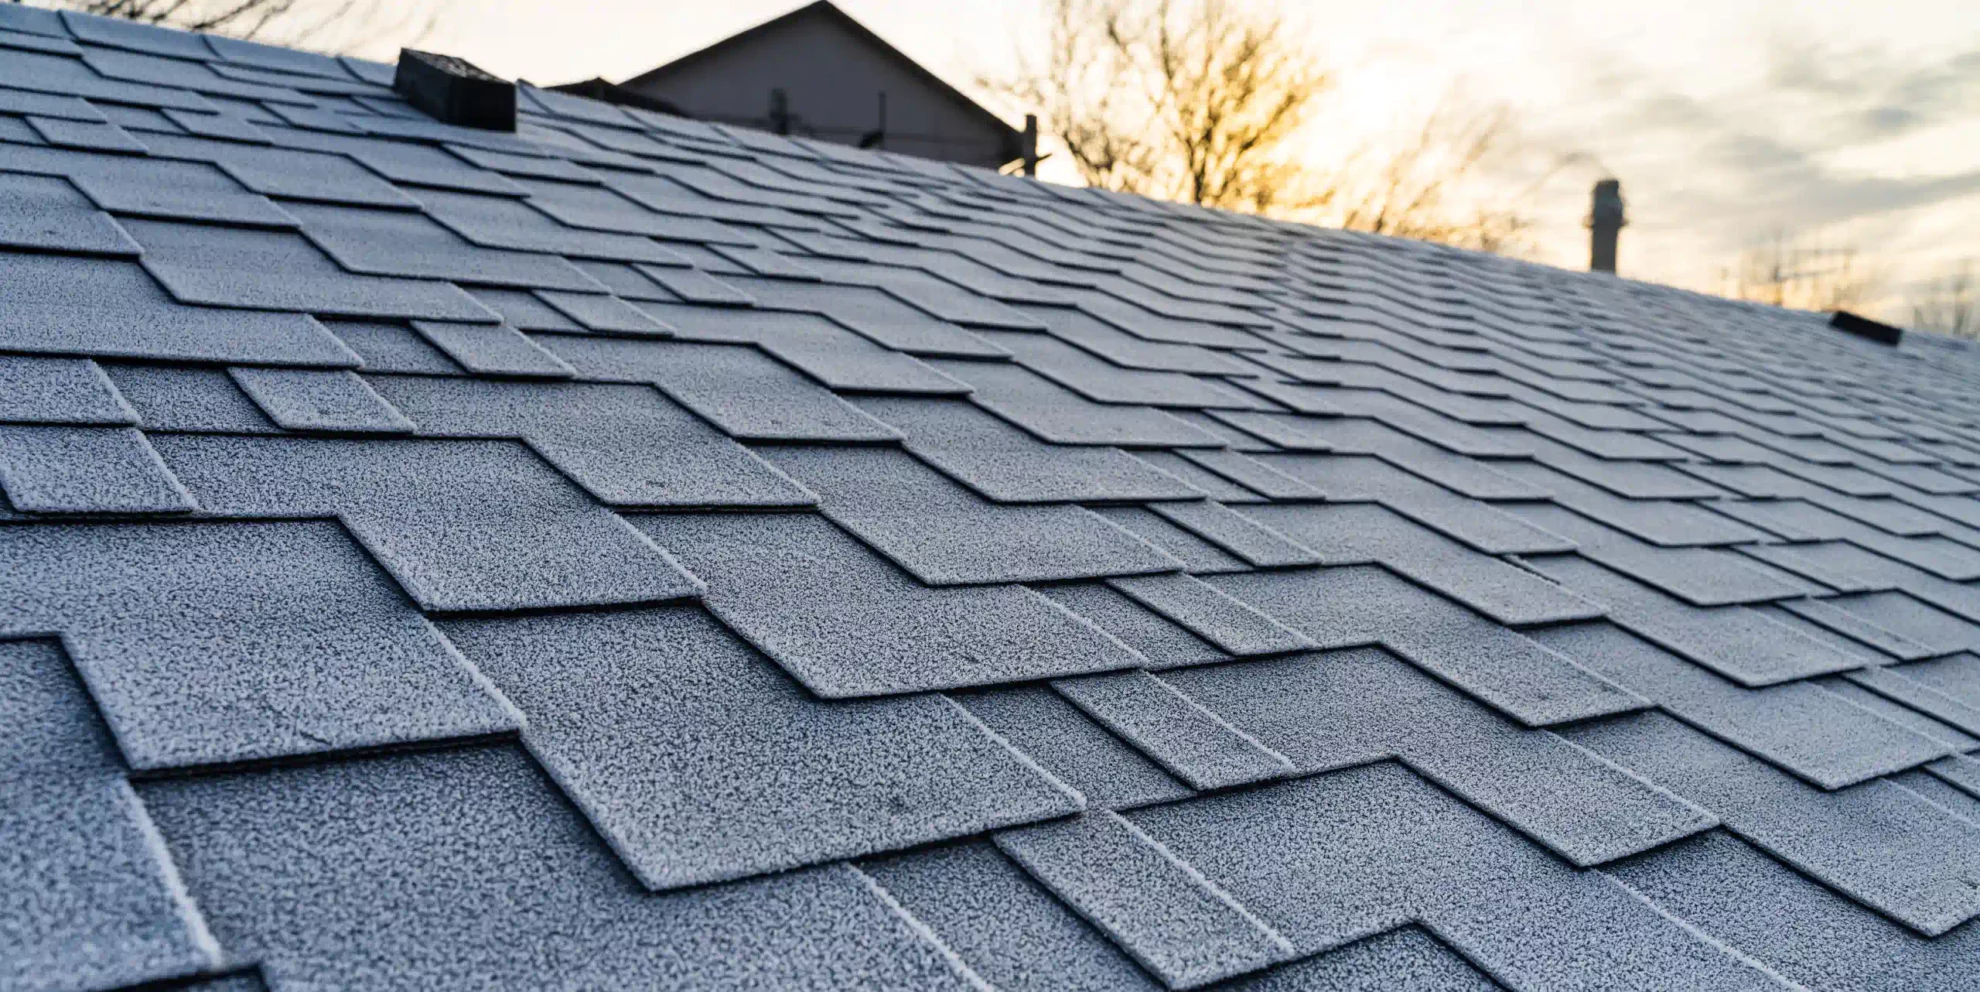 an angled view of the roof shingles